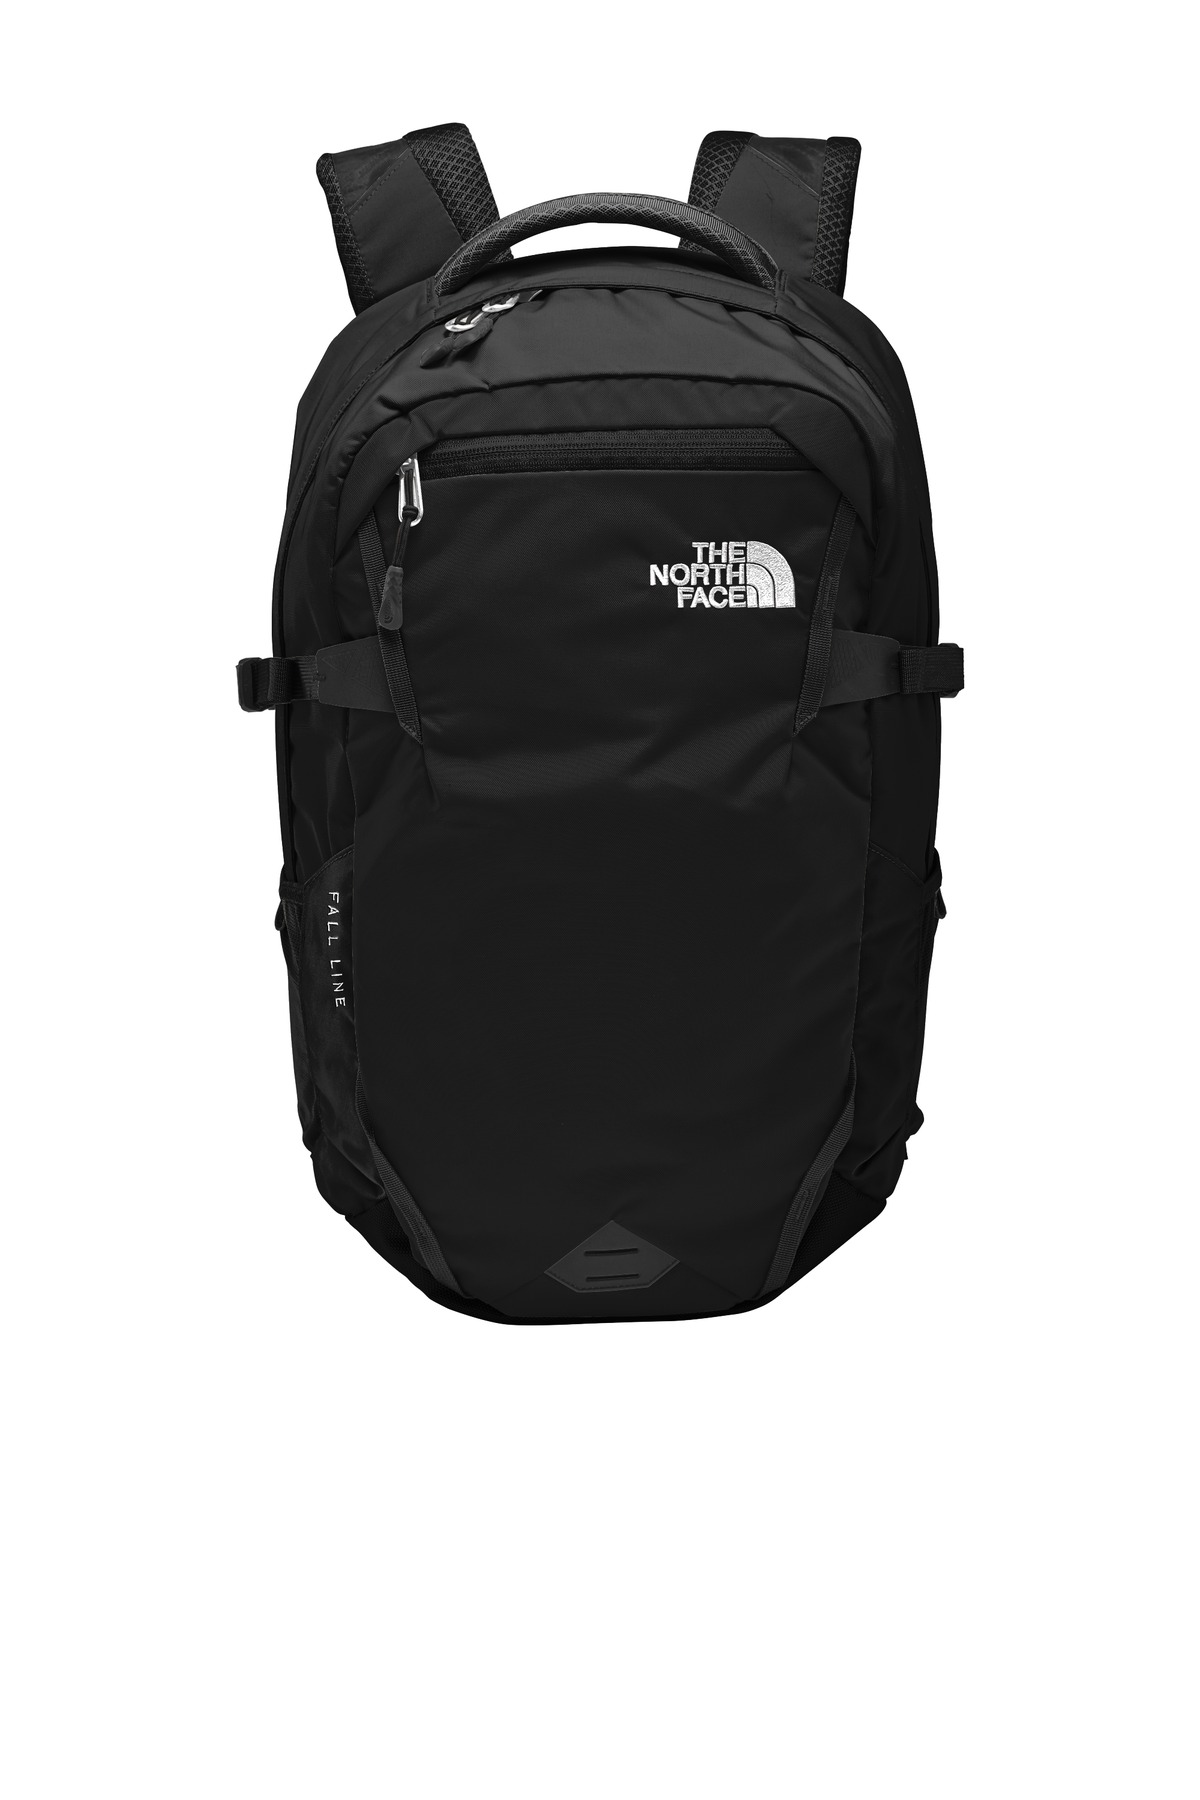  The North Face Fall Line Backpack. NF0A3KX7